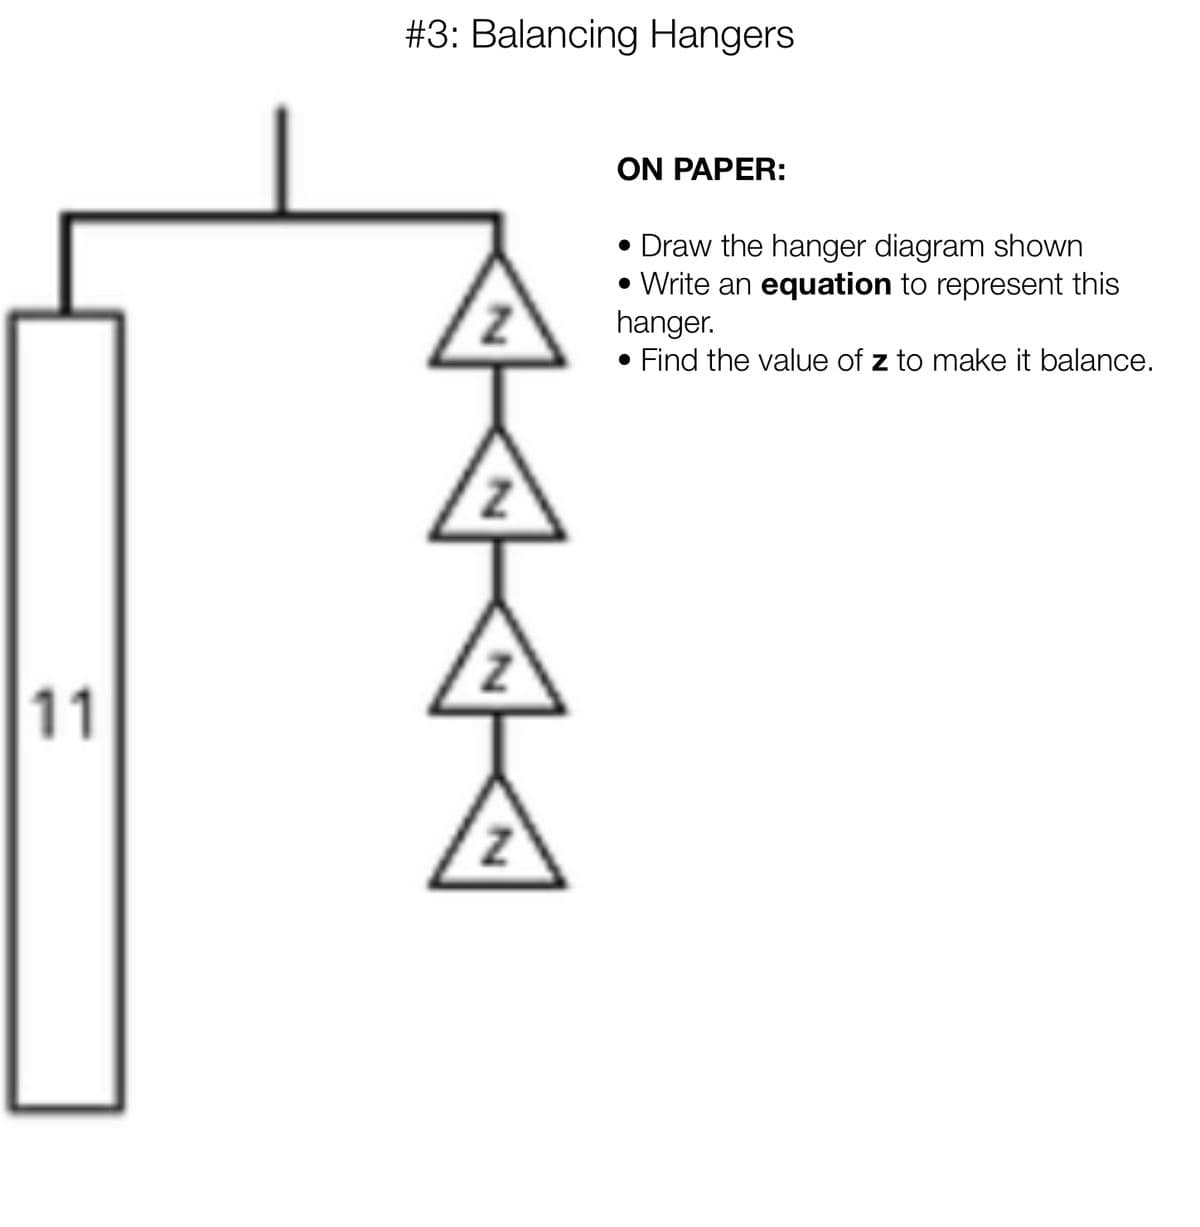 #3: Balancing Hangers
ON PAPER:
Draw the hanger diagram shown
• Write an equation to represent this
hanger.
• Find the value of z to make it balance.
11
